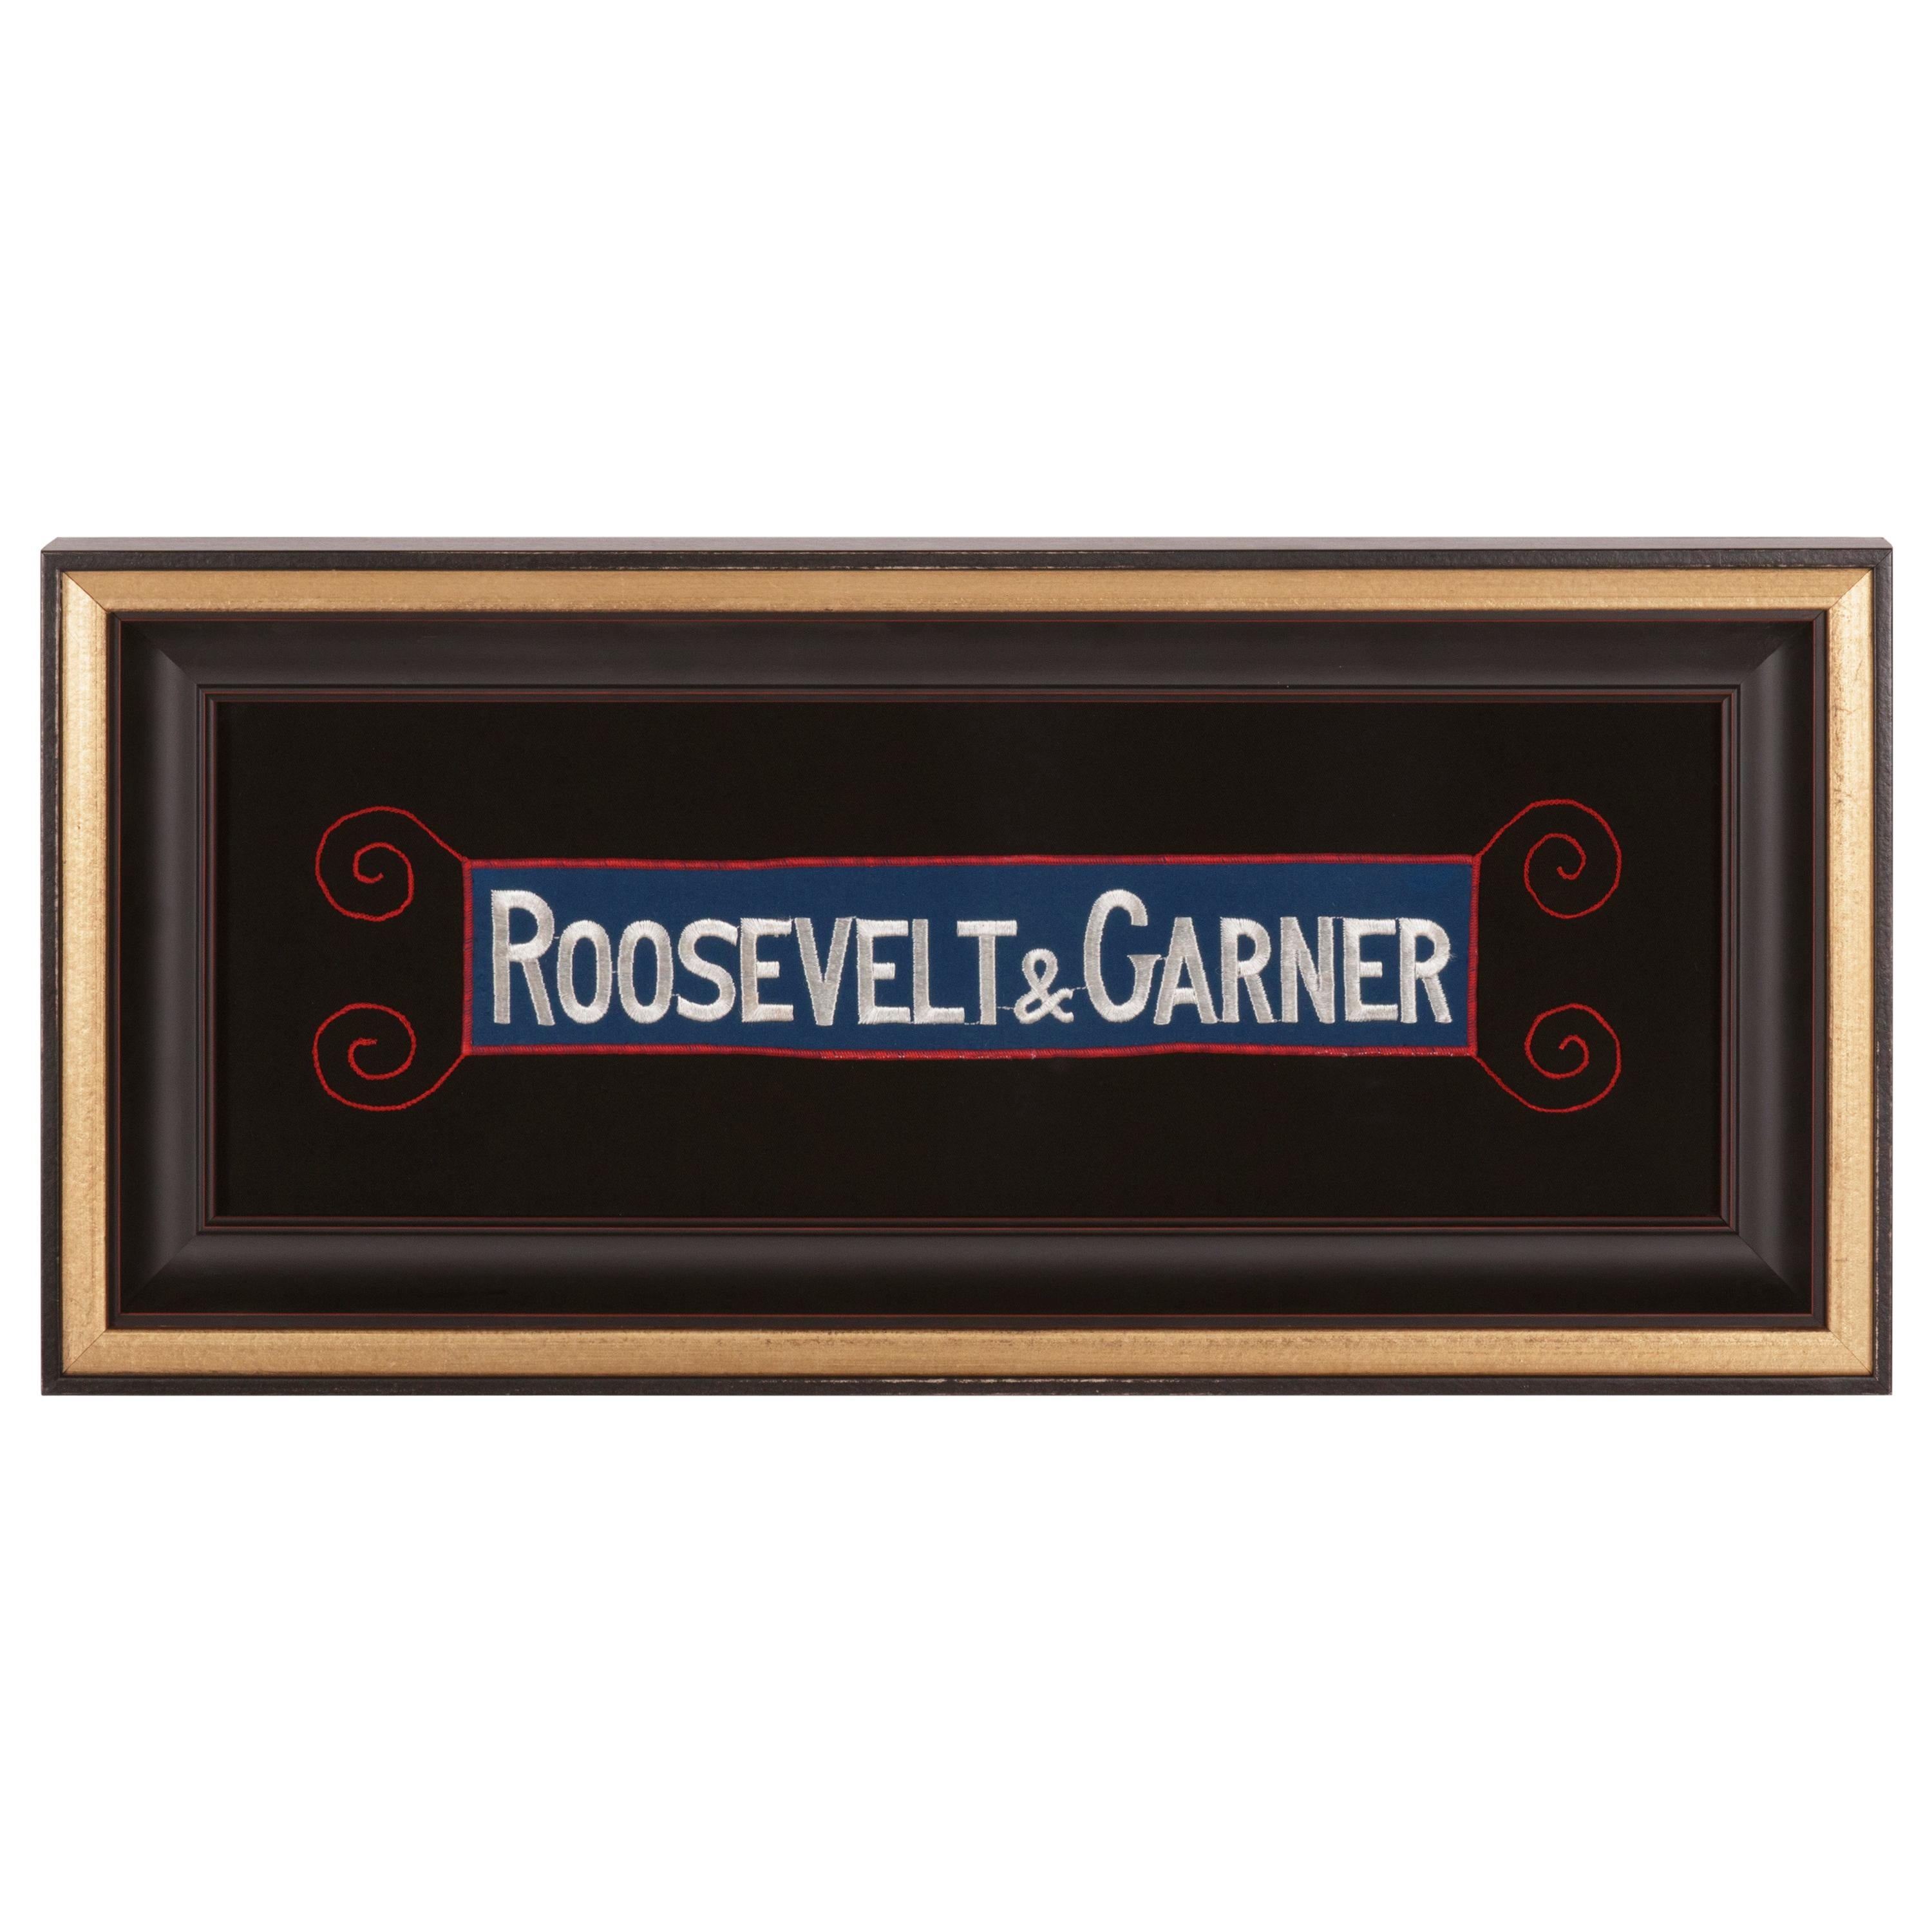 "Roosevelt & Garner" Embroidered Armband Supporting the 1932 Democratic Ticket